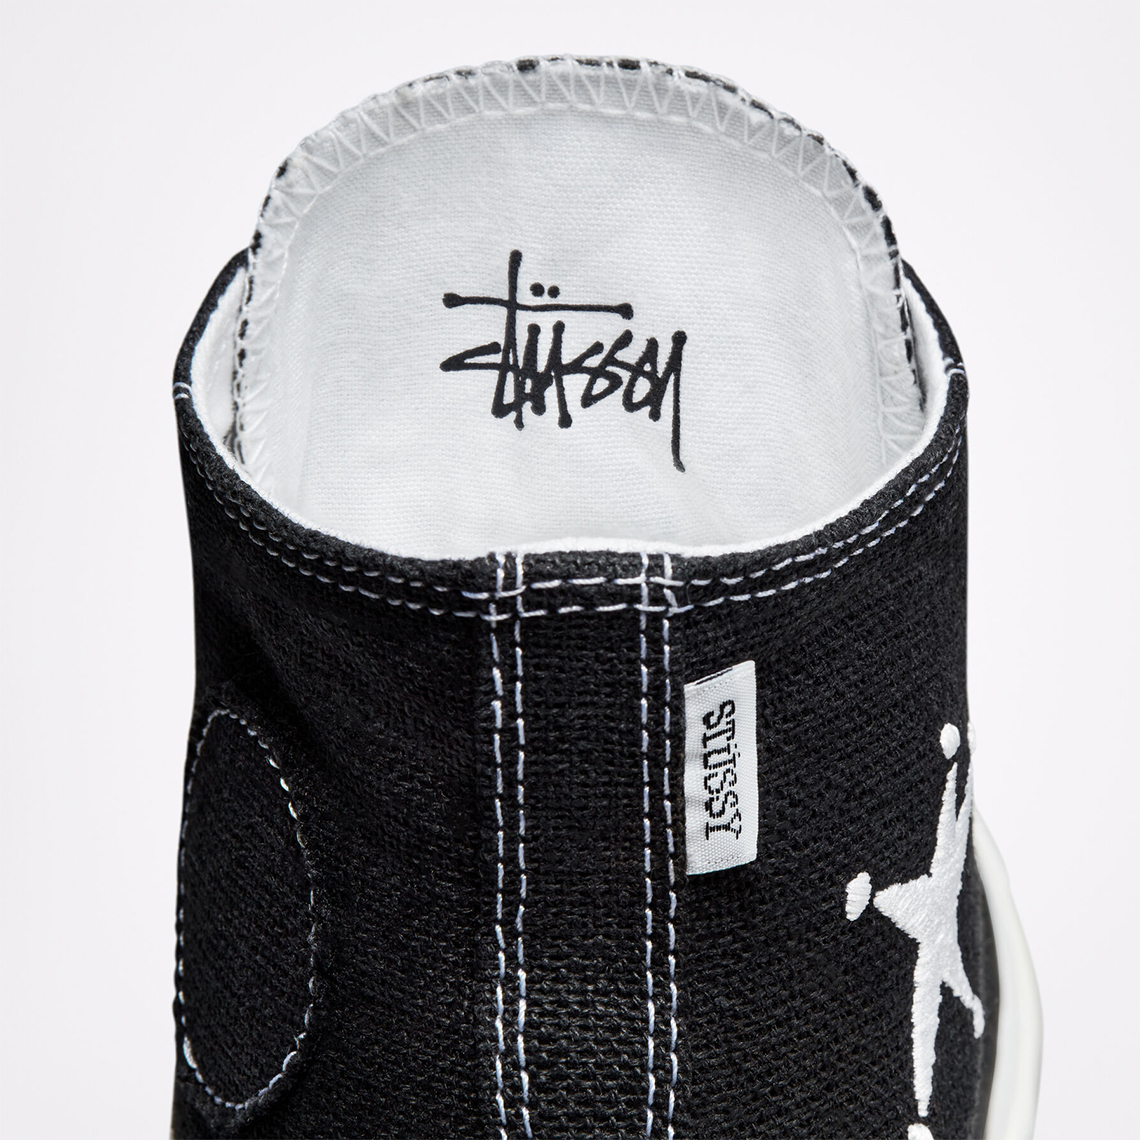 Stussy Converse unbleached x BRAIN DEAD BOSEY BOOT OX "NATURAL" A01765c Release Date 6